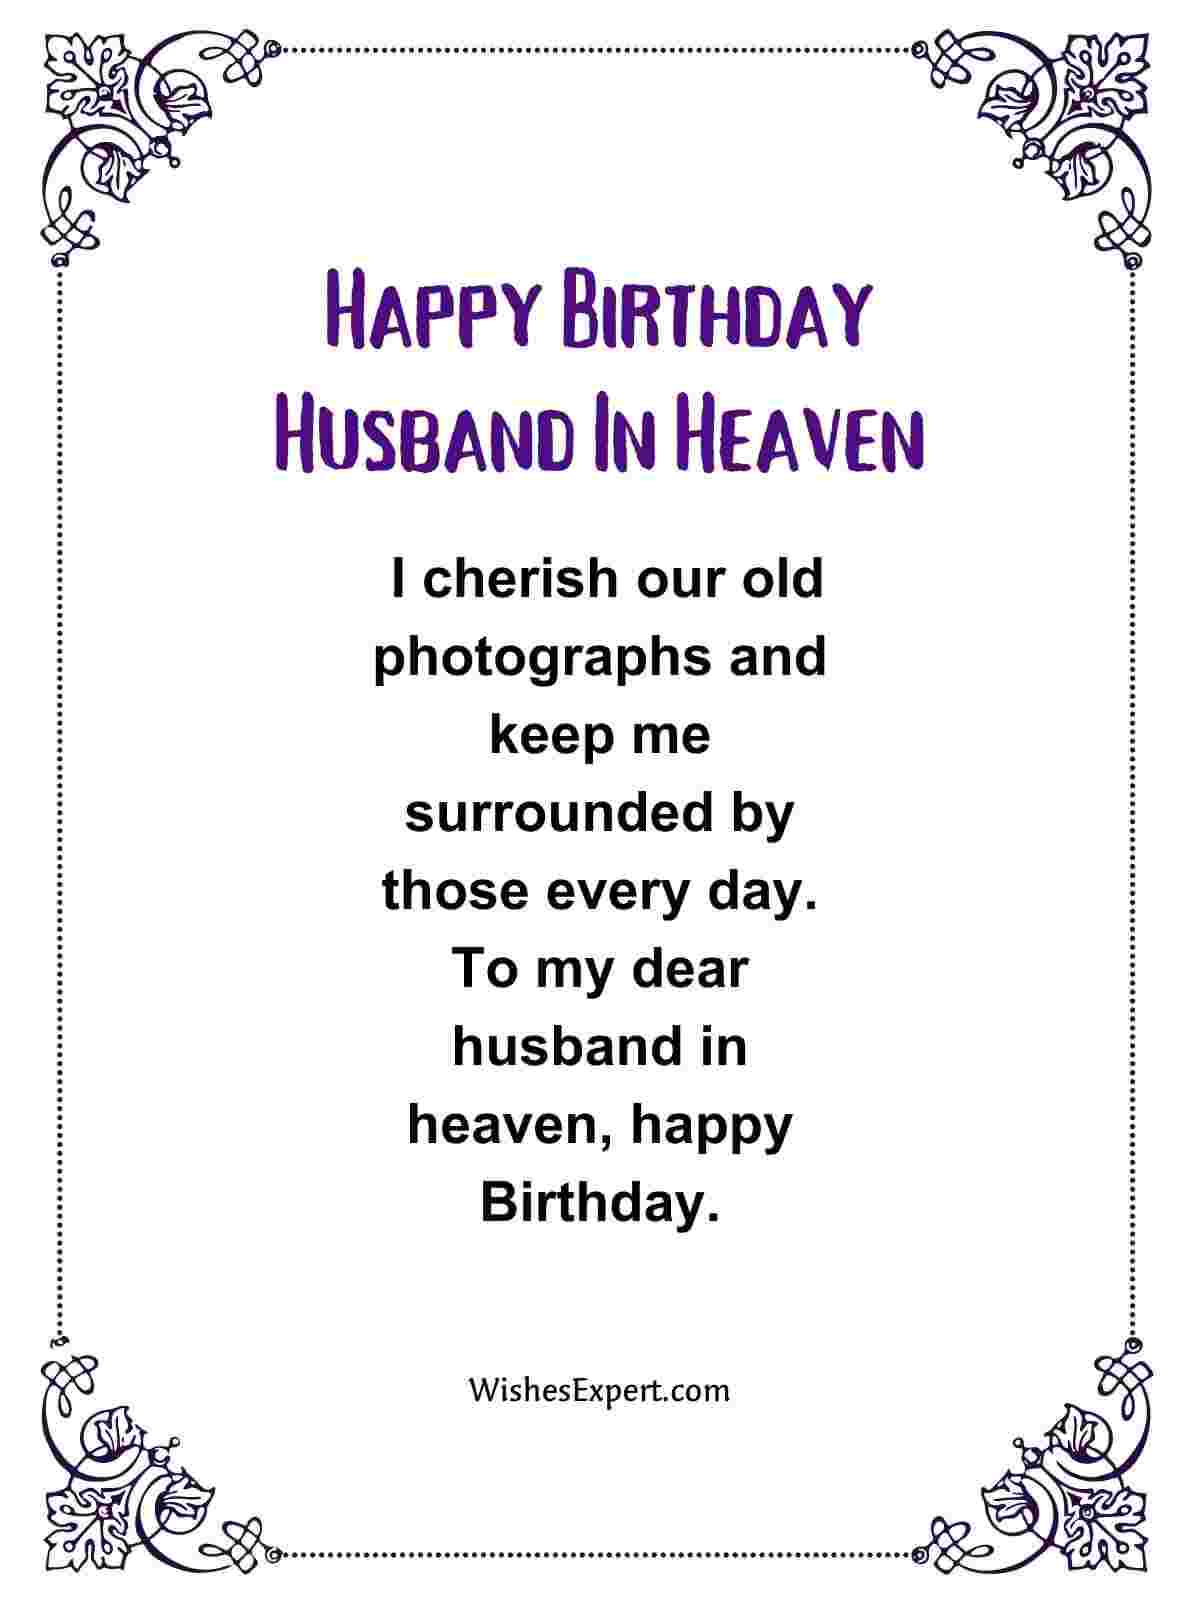 Miss You Messages For Husband On His Birthday Who Is In Heaven